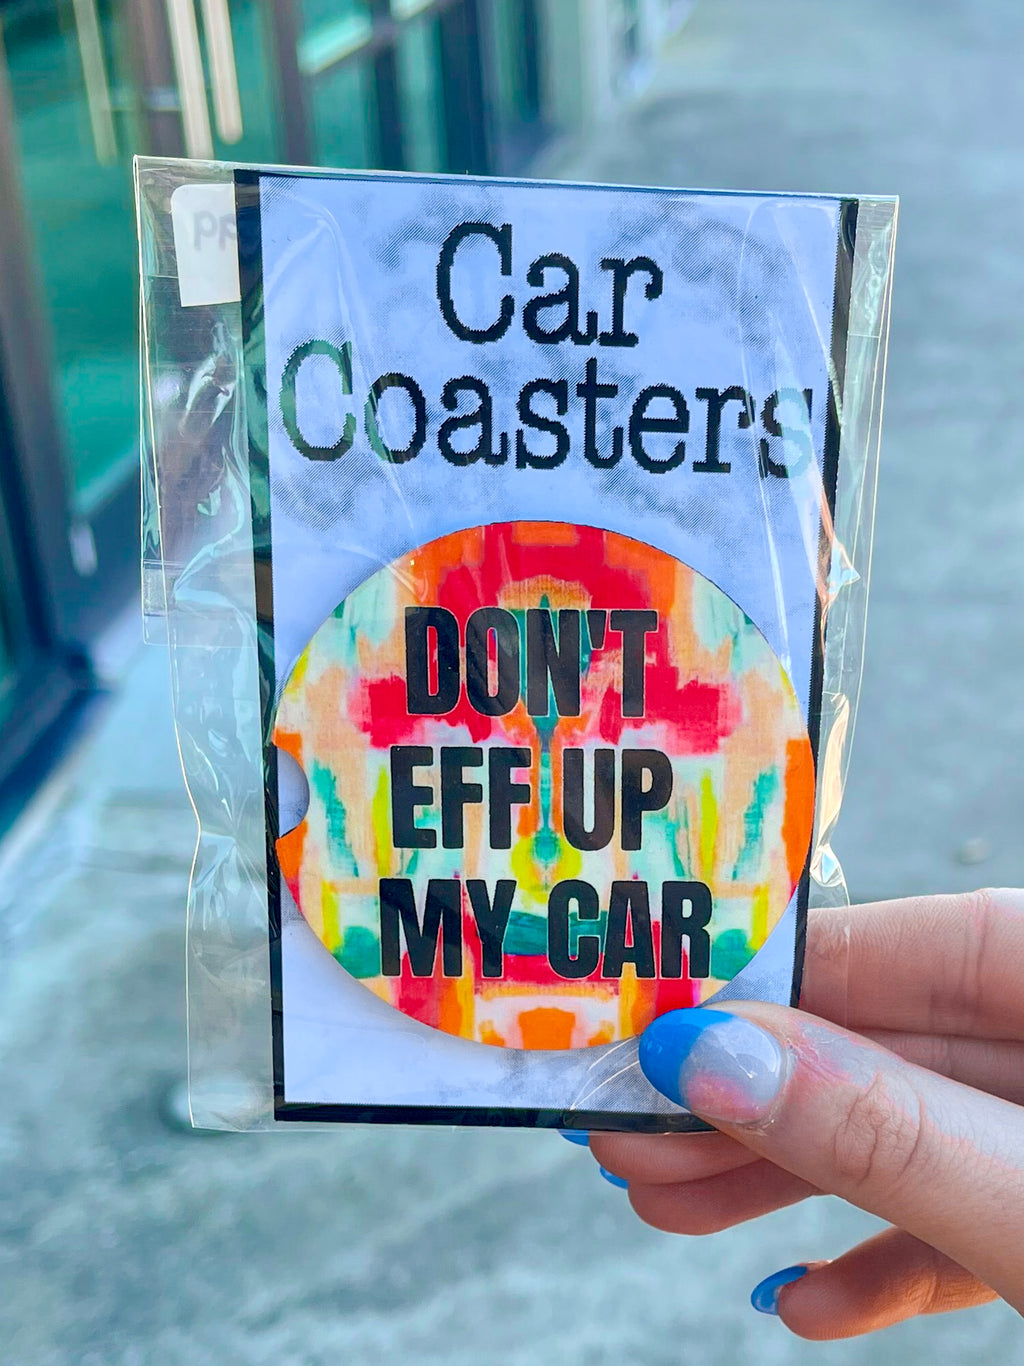 Anyone else very particular about their car? Like you can eff up your car but no one else better eff it up! Girl, these are calling your name!   *2 coasters come in a pack* 